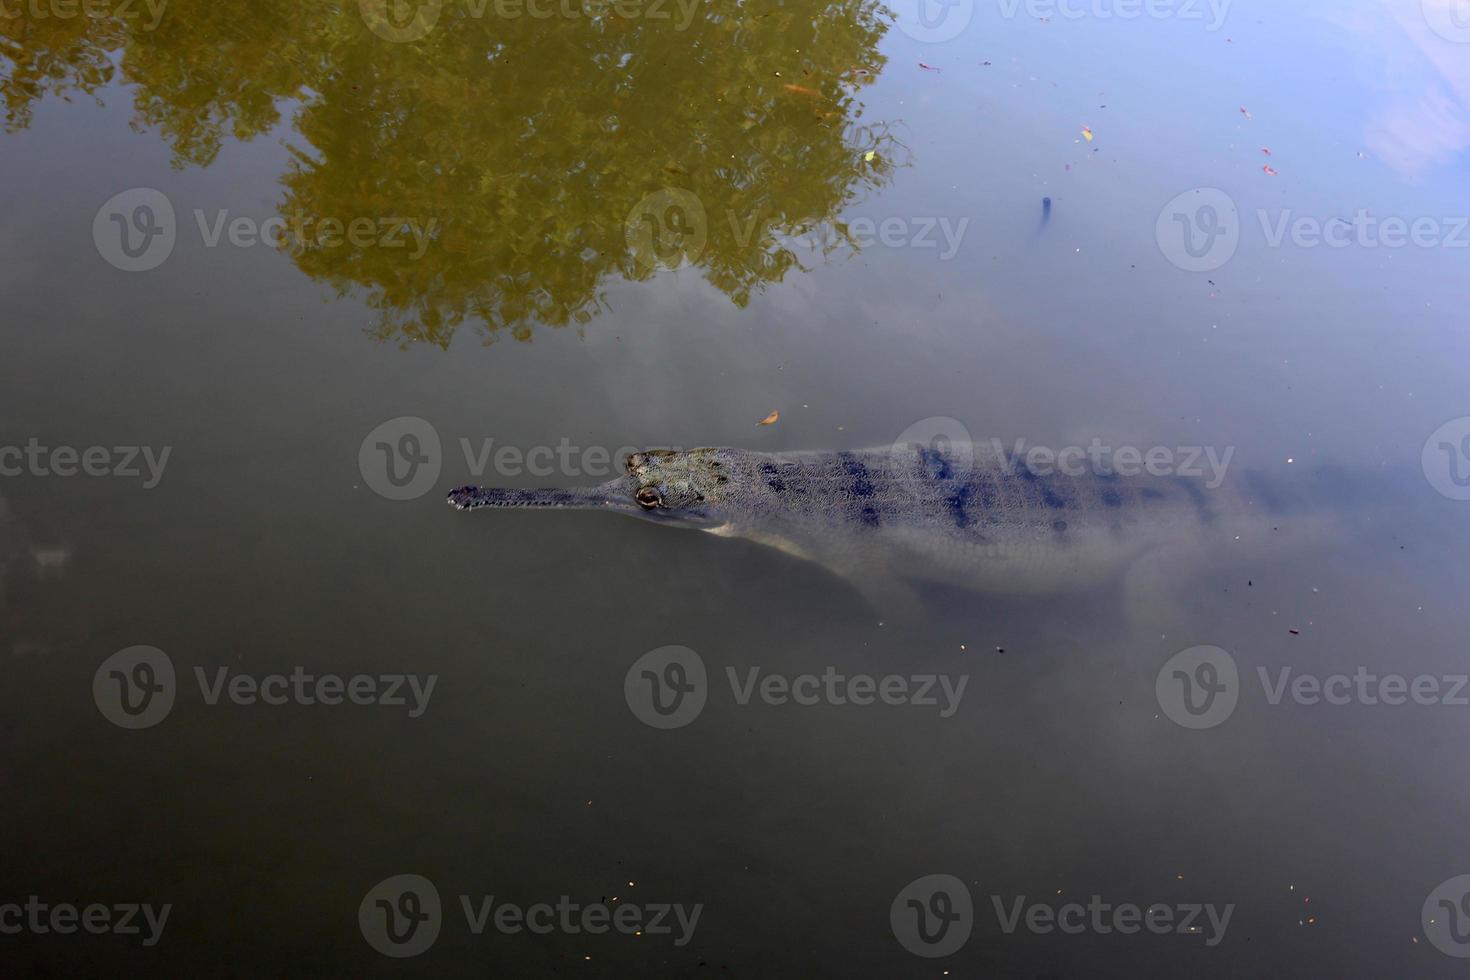 Large crocodiles in the Hamat - Gader nature reserve in northern Israel photo